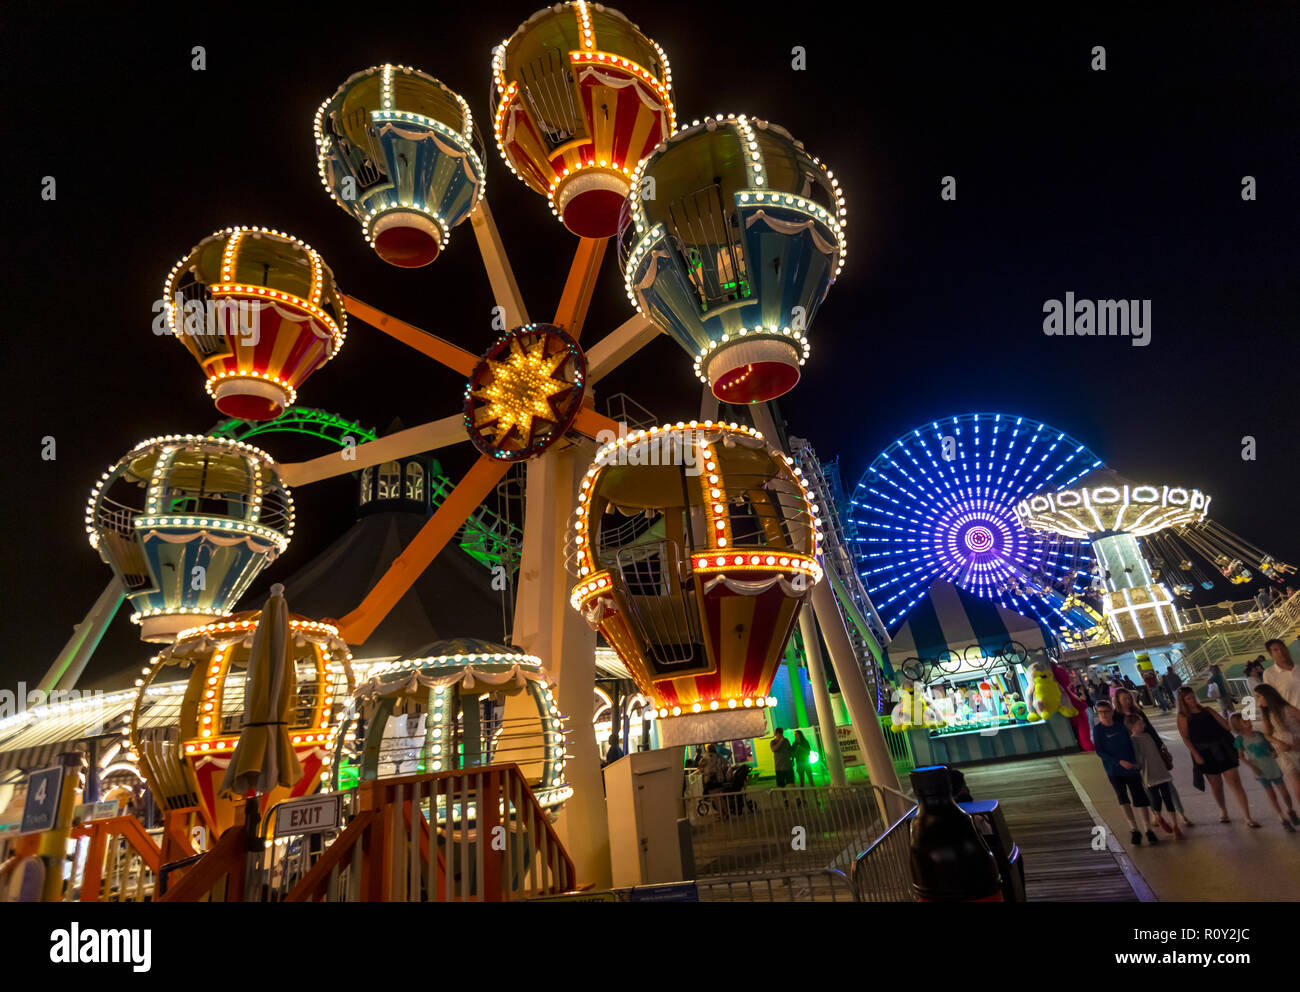 An amusement park with rides riders at nighttime at the ocean shore. Stock Photo